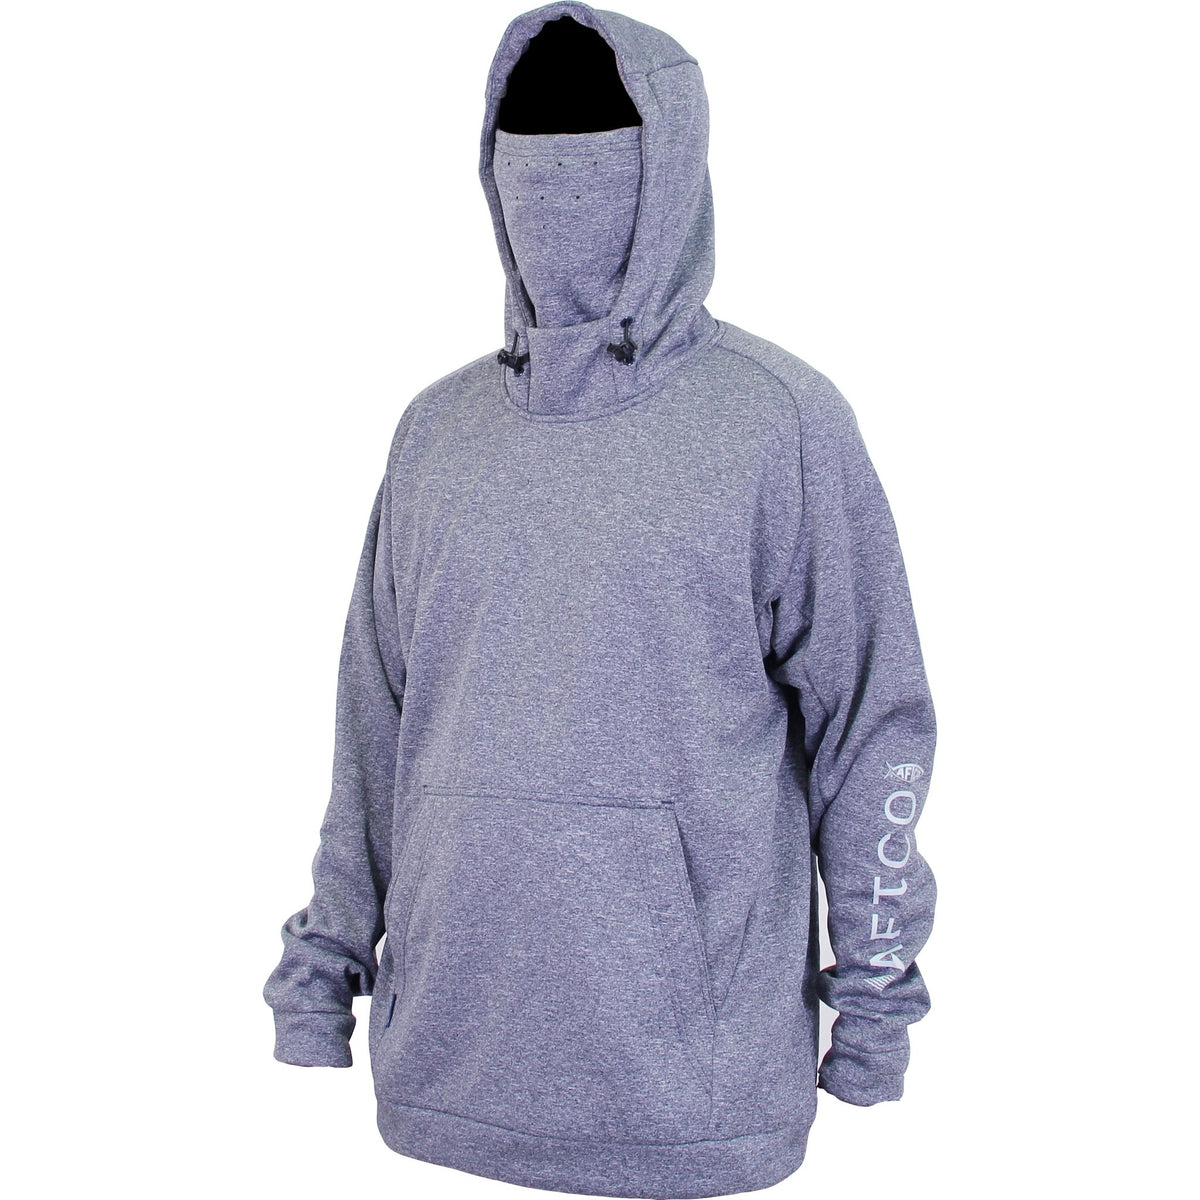 Hobie Fishing Technical Hoodie by Aftco